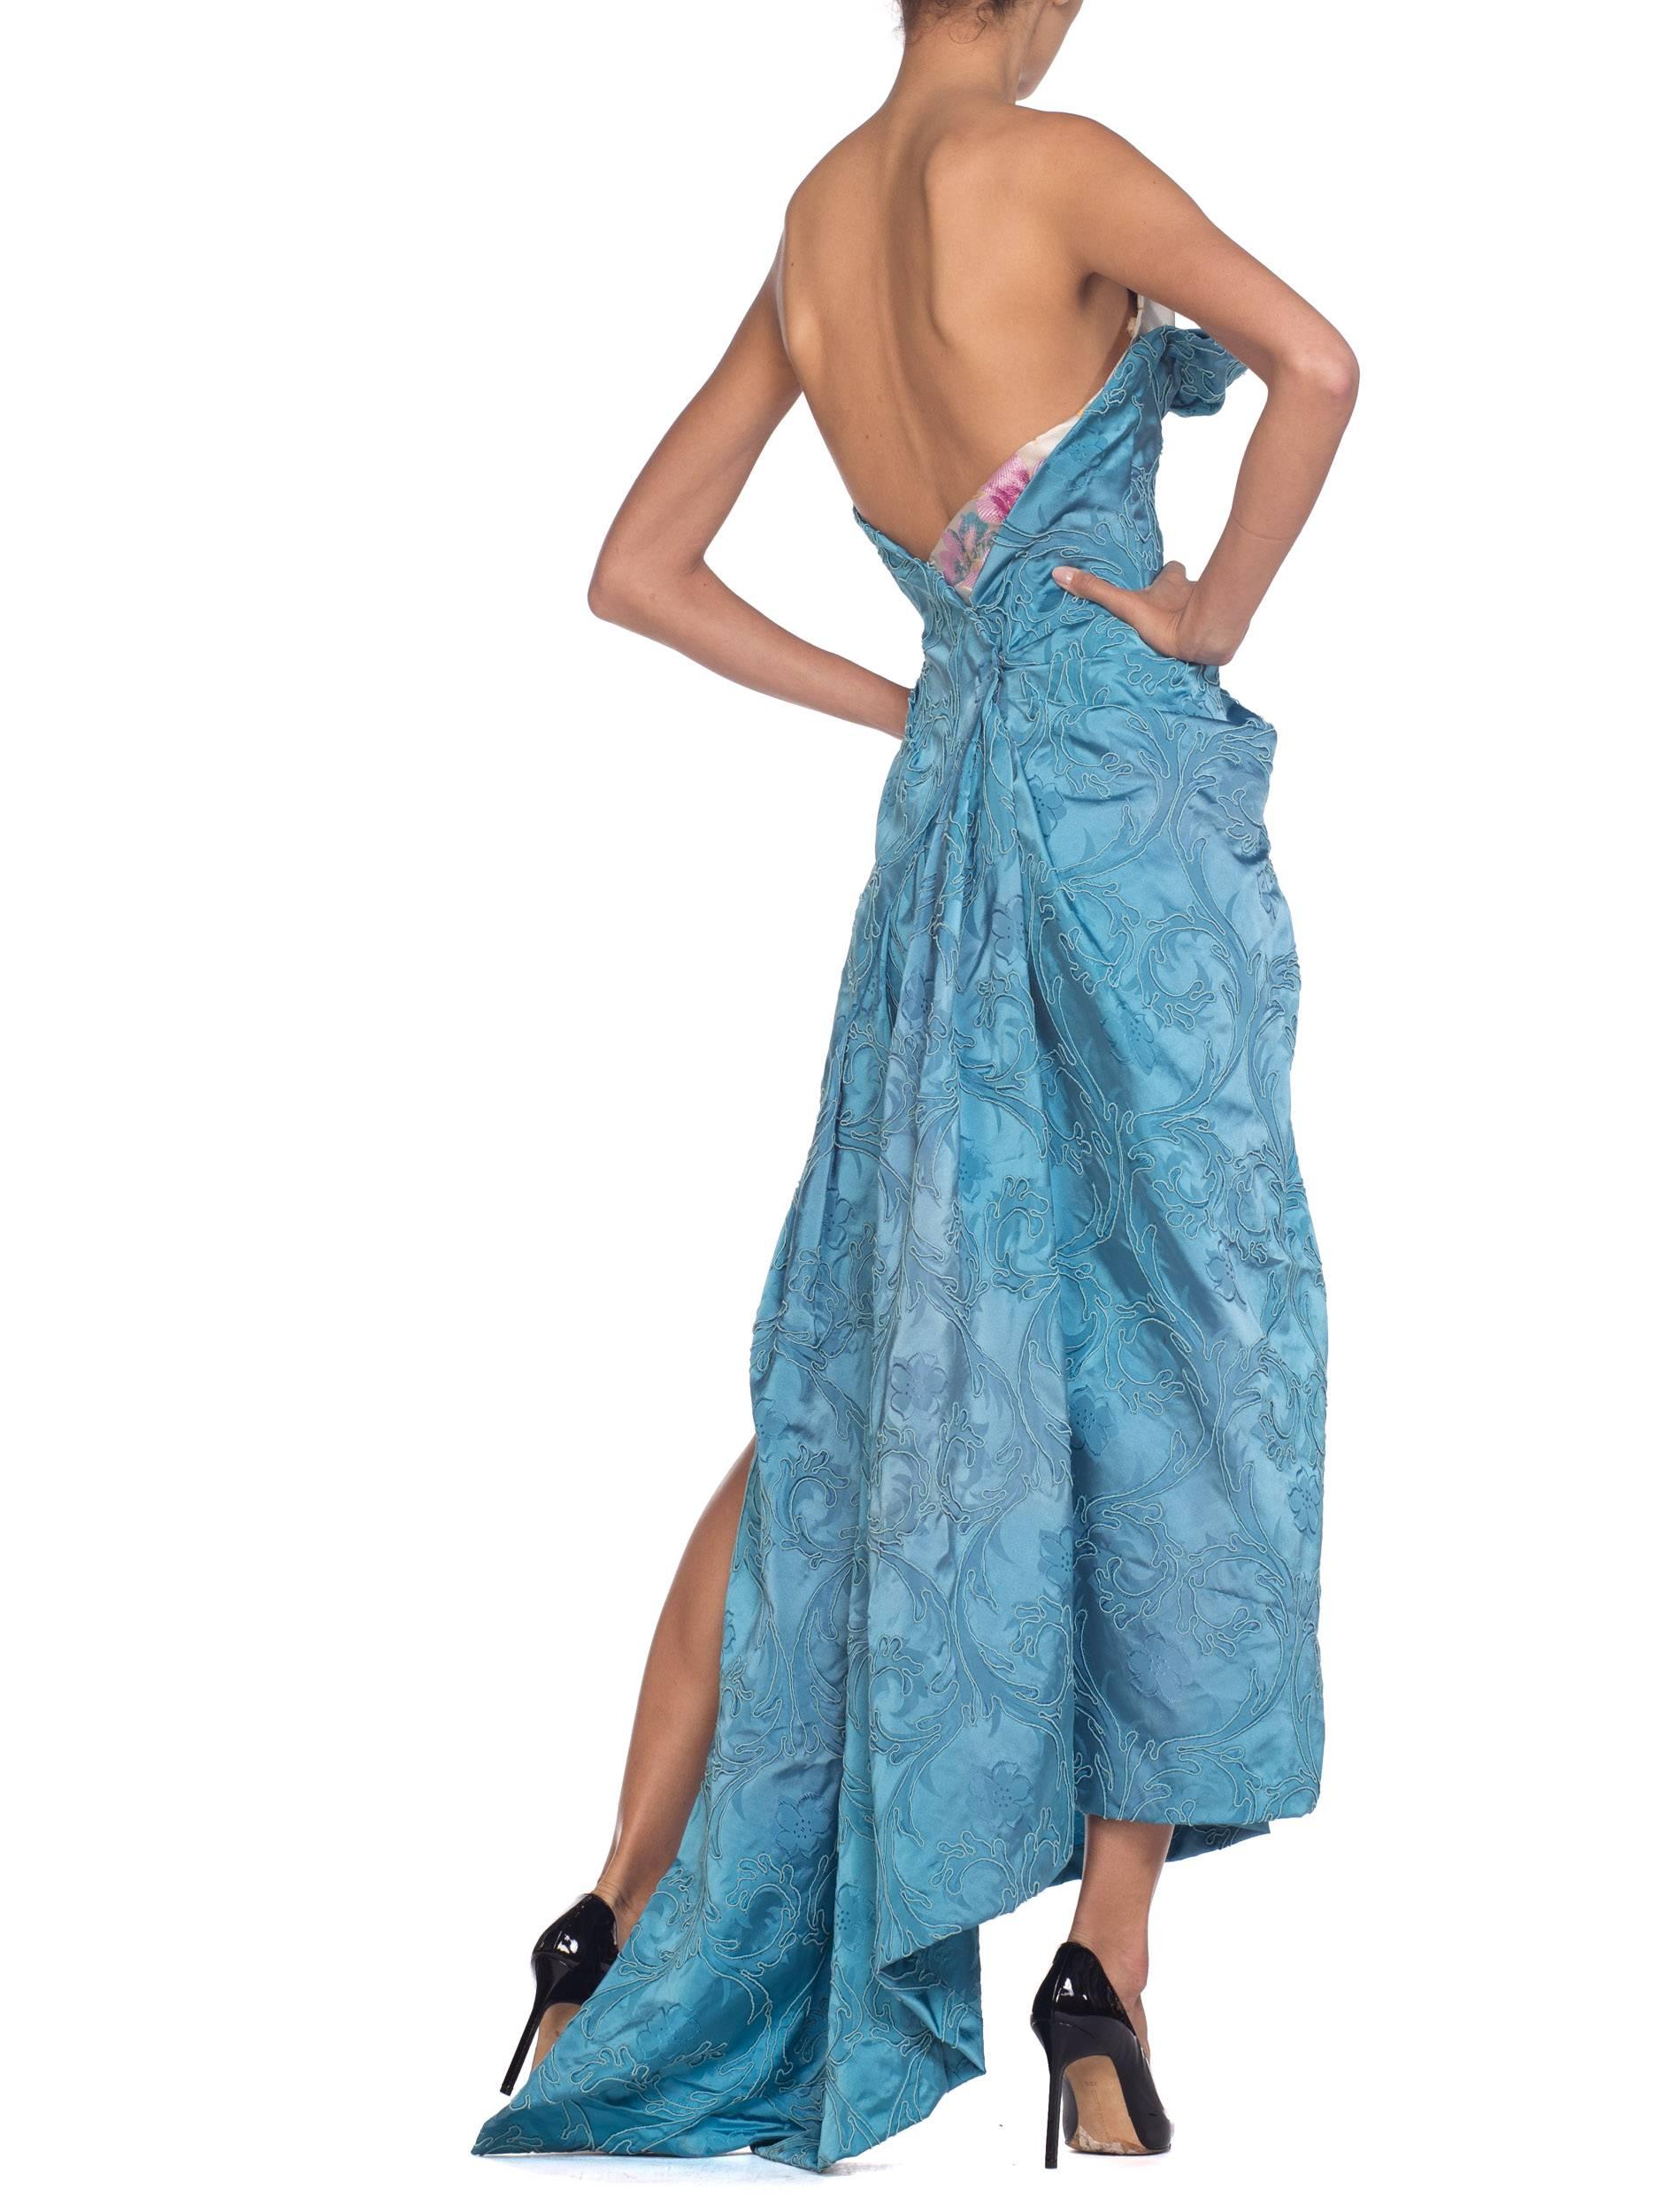 Morphew Strapless Gown with Boning Made from 1950s Blue Satin Demask  1